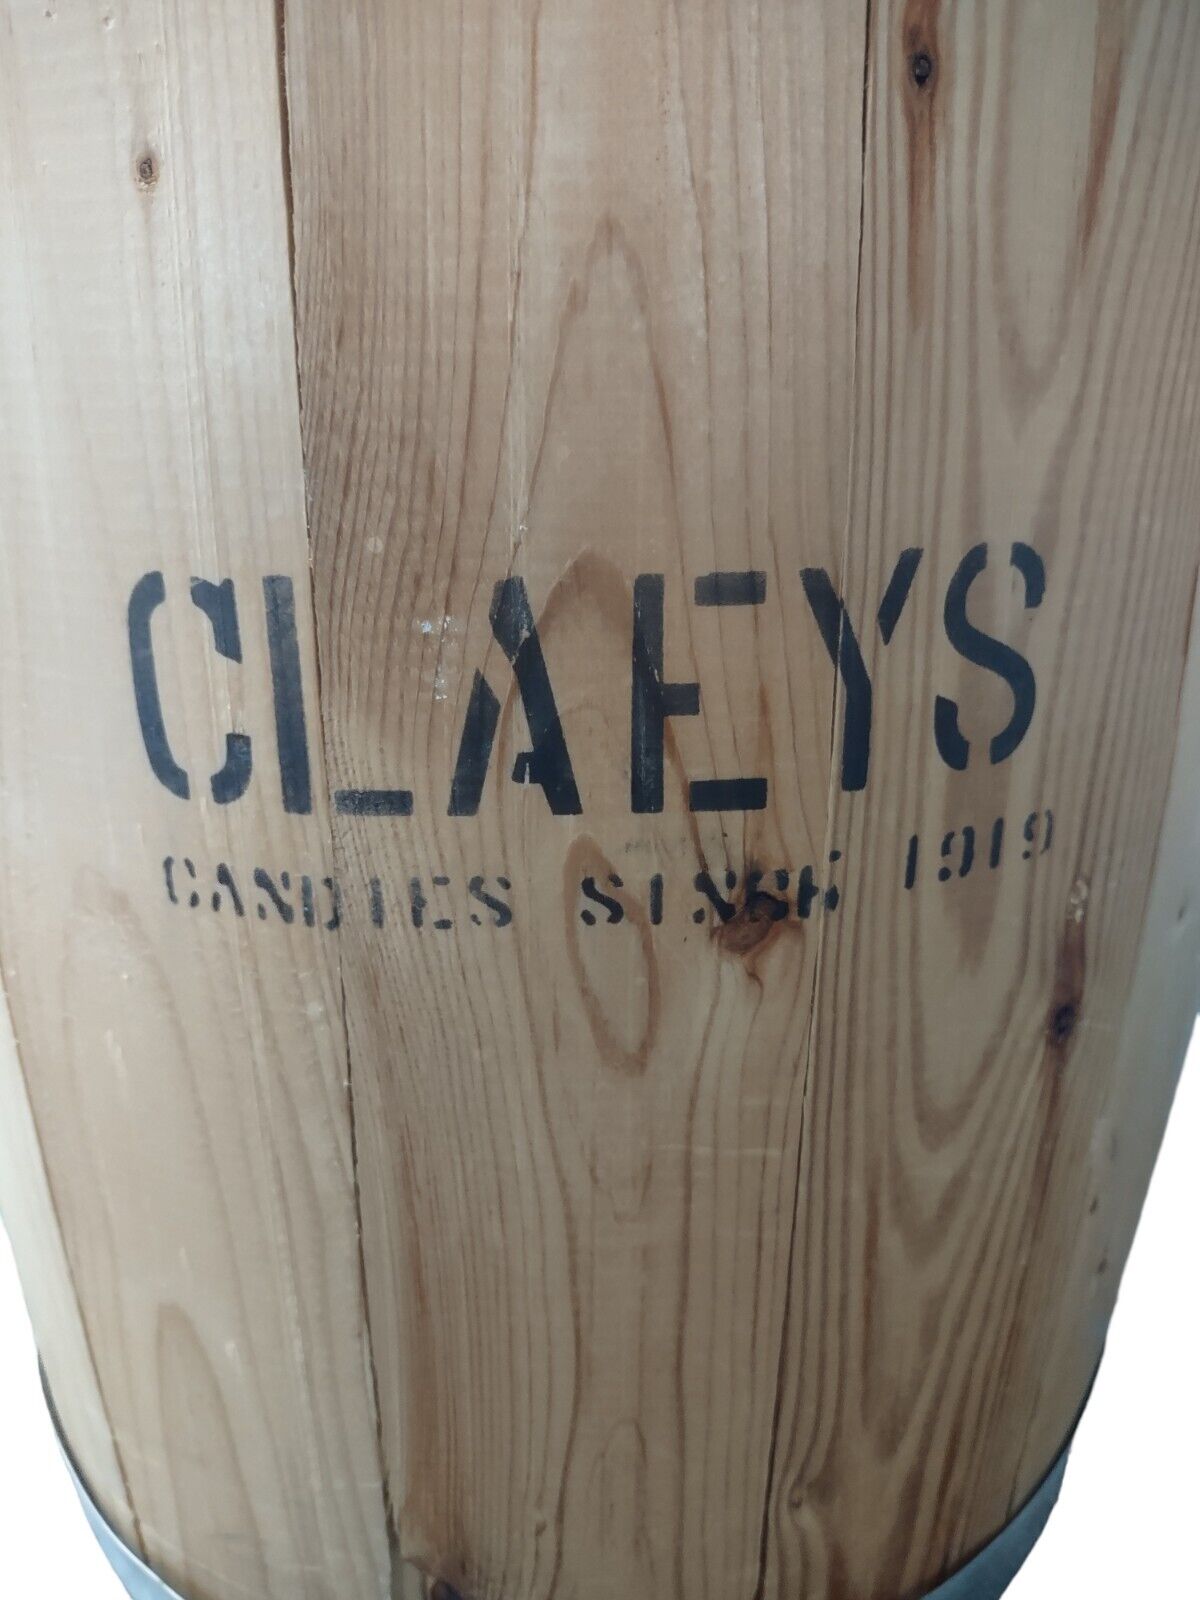 Claeys Candies Wood Panel Store Display Barrel Wooden container